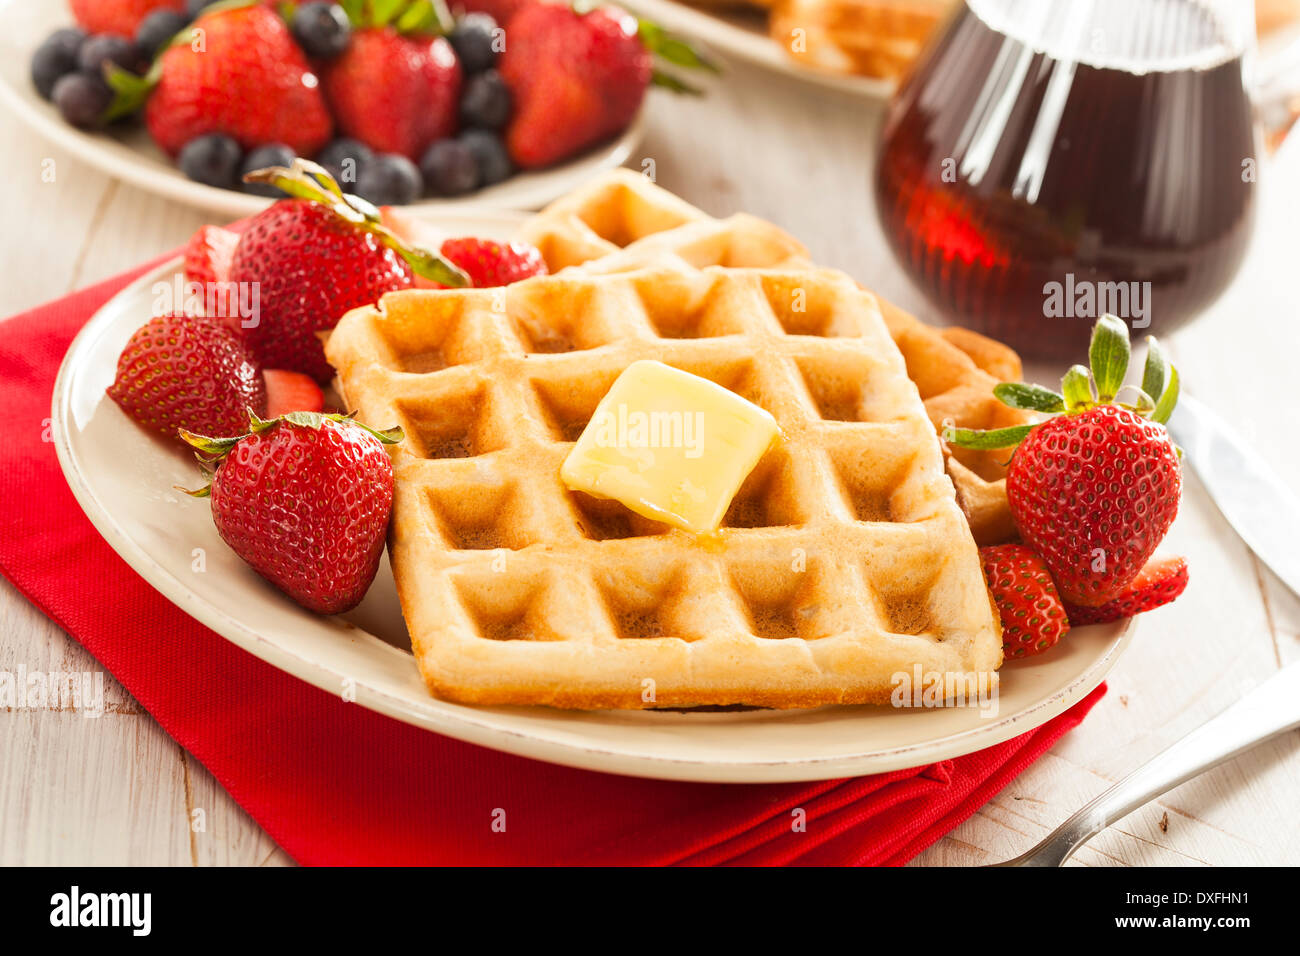 Homemade Belgian Waffles with Strawberries and Maple Syrup Stock Photo